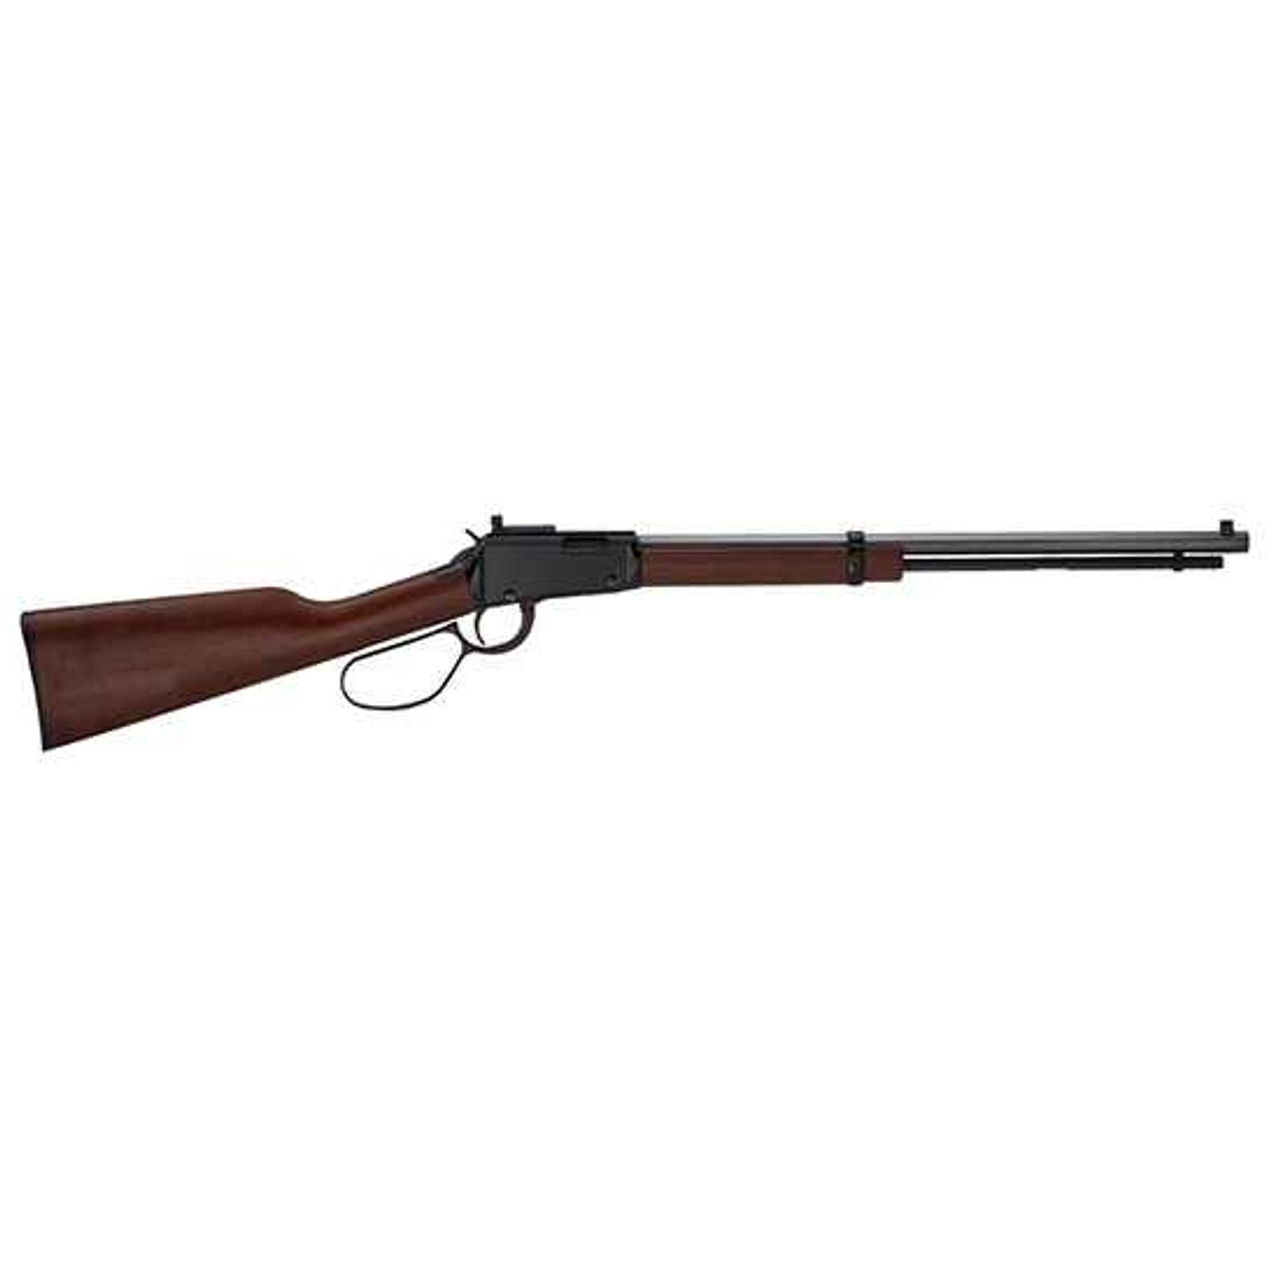 HENRY SMALL GAME RIFLE 22LR 20 W/ PEEP SIGHT